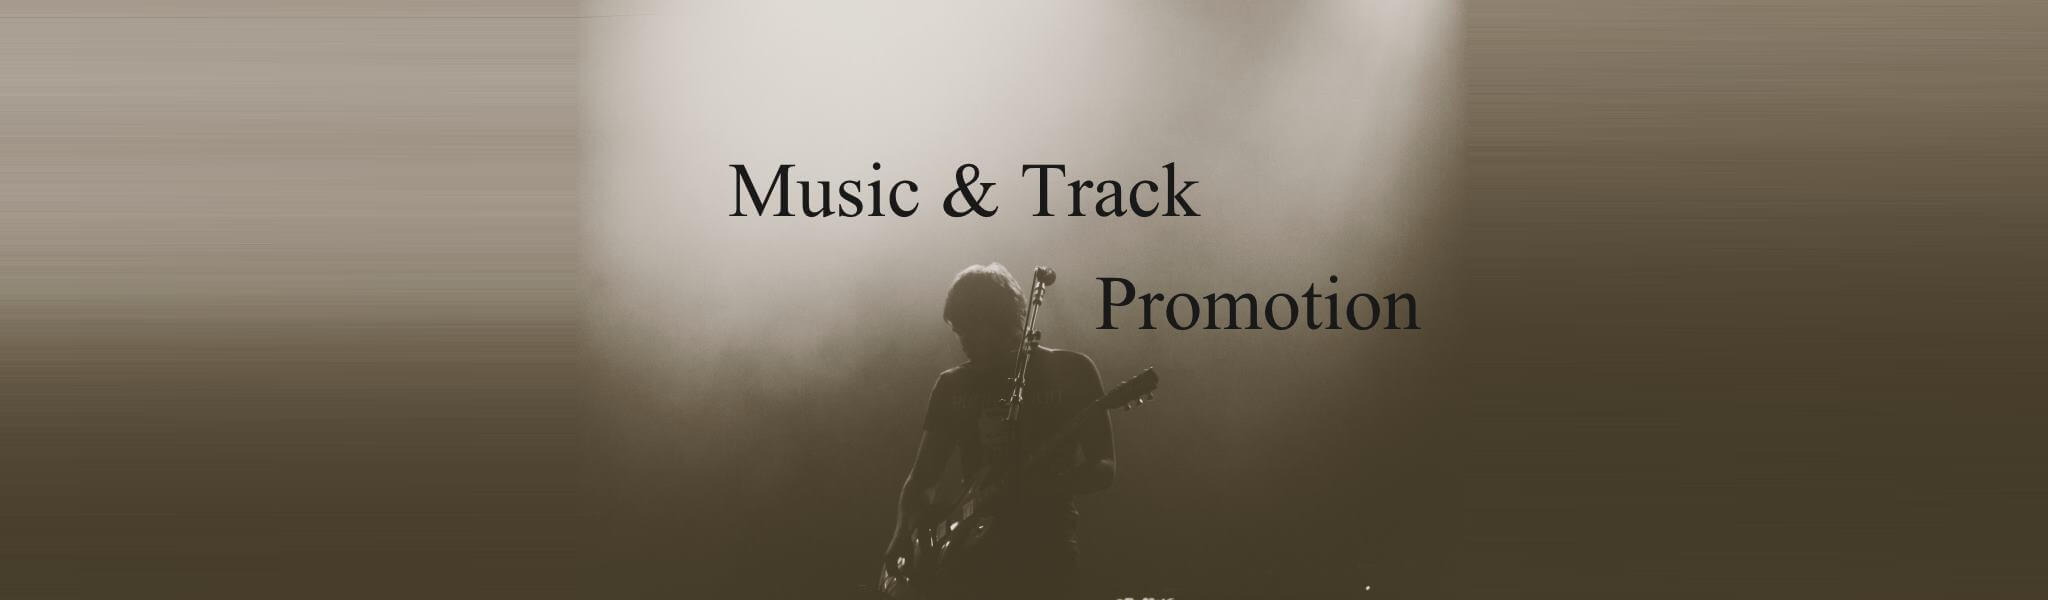 Advertise your Music Tracks and Videos